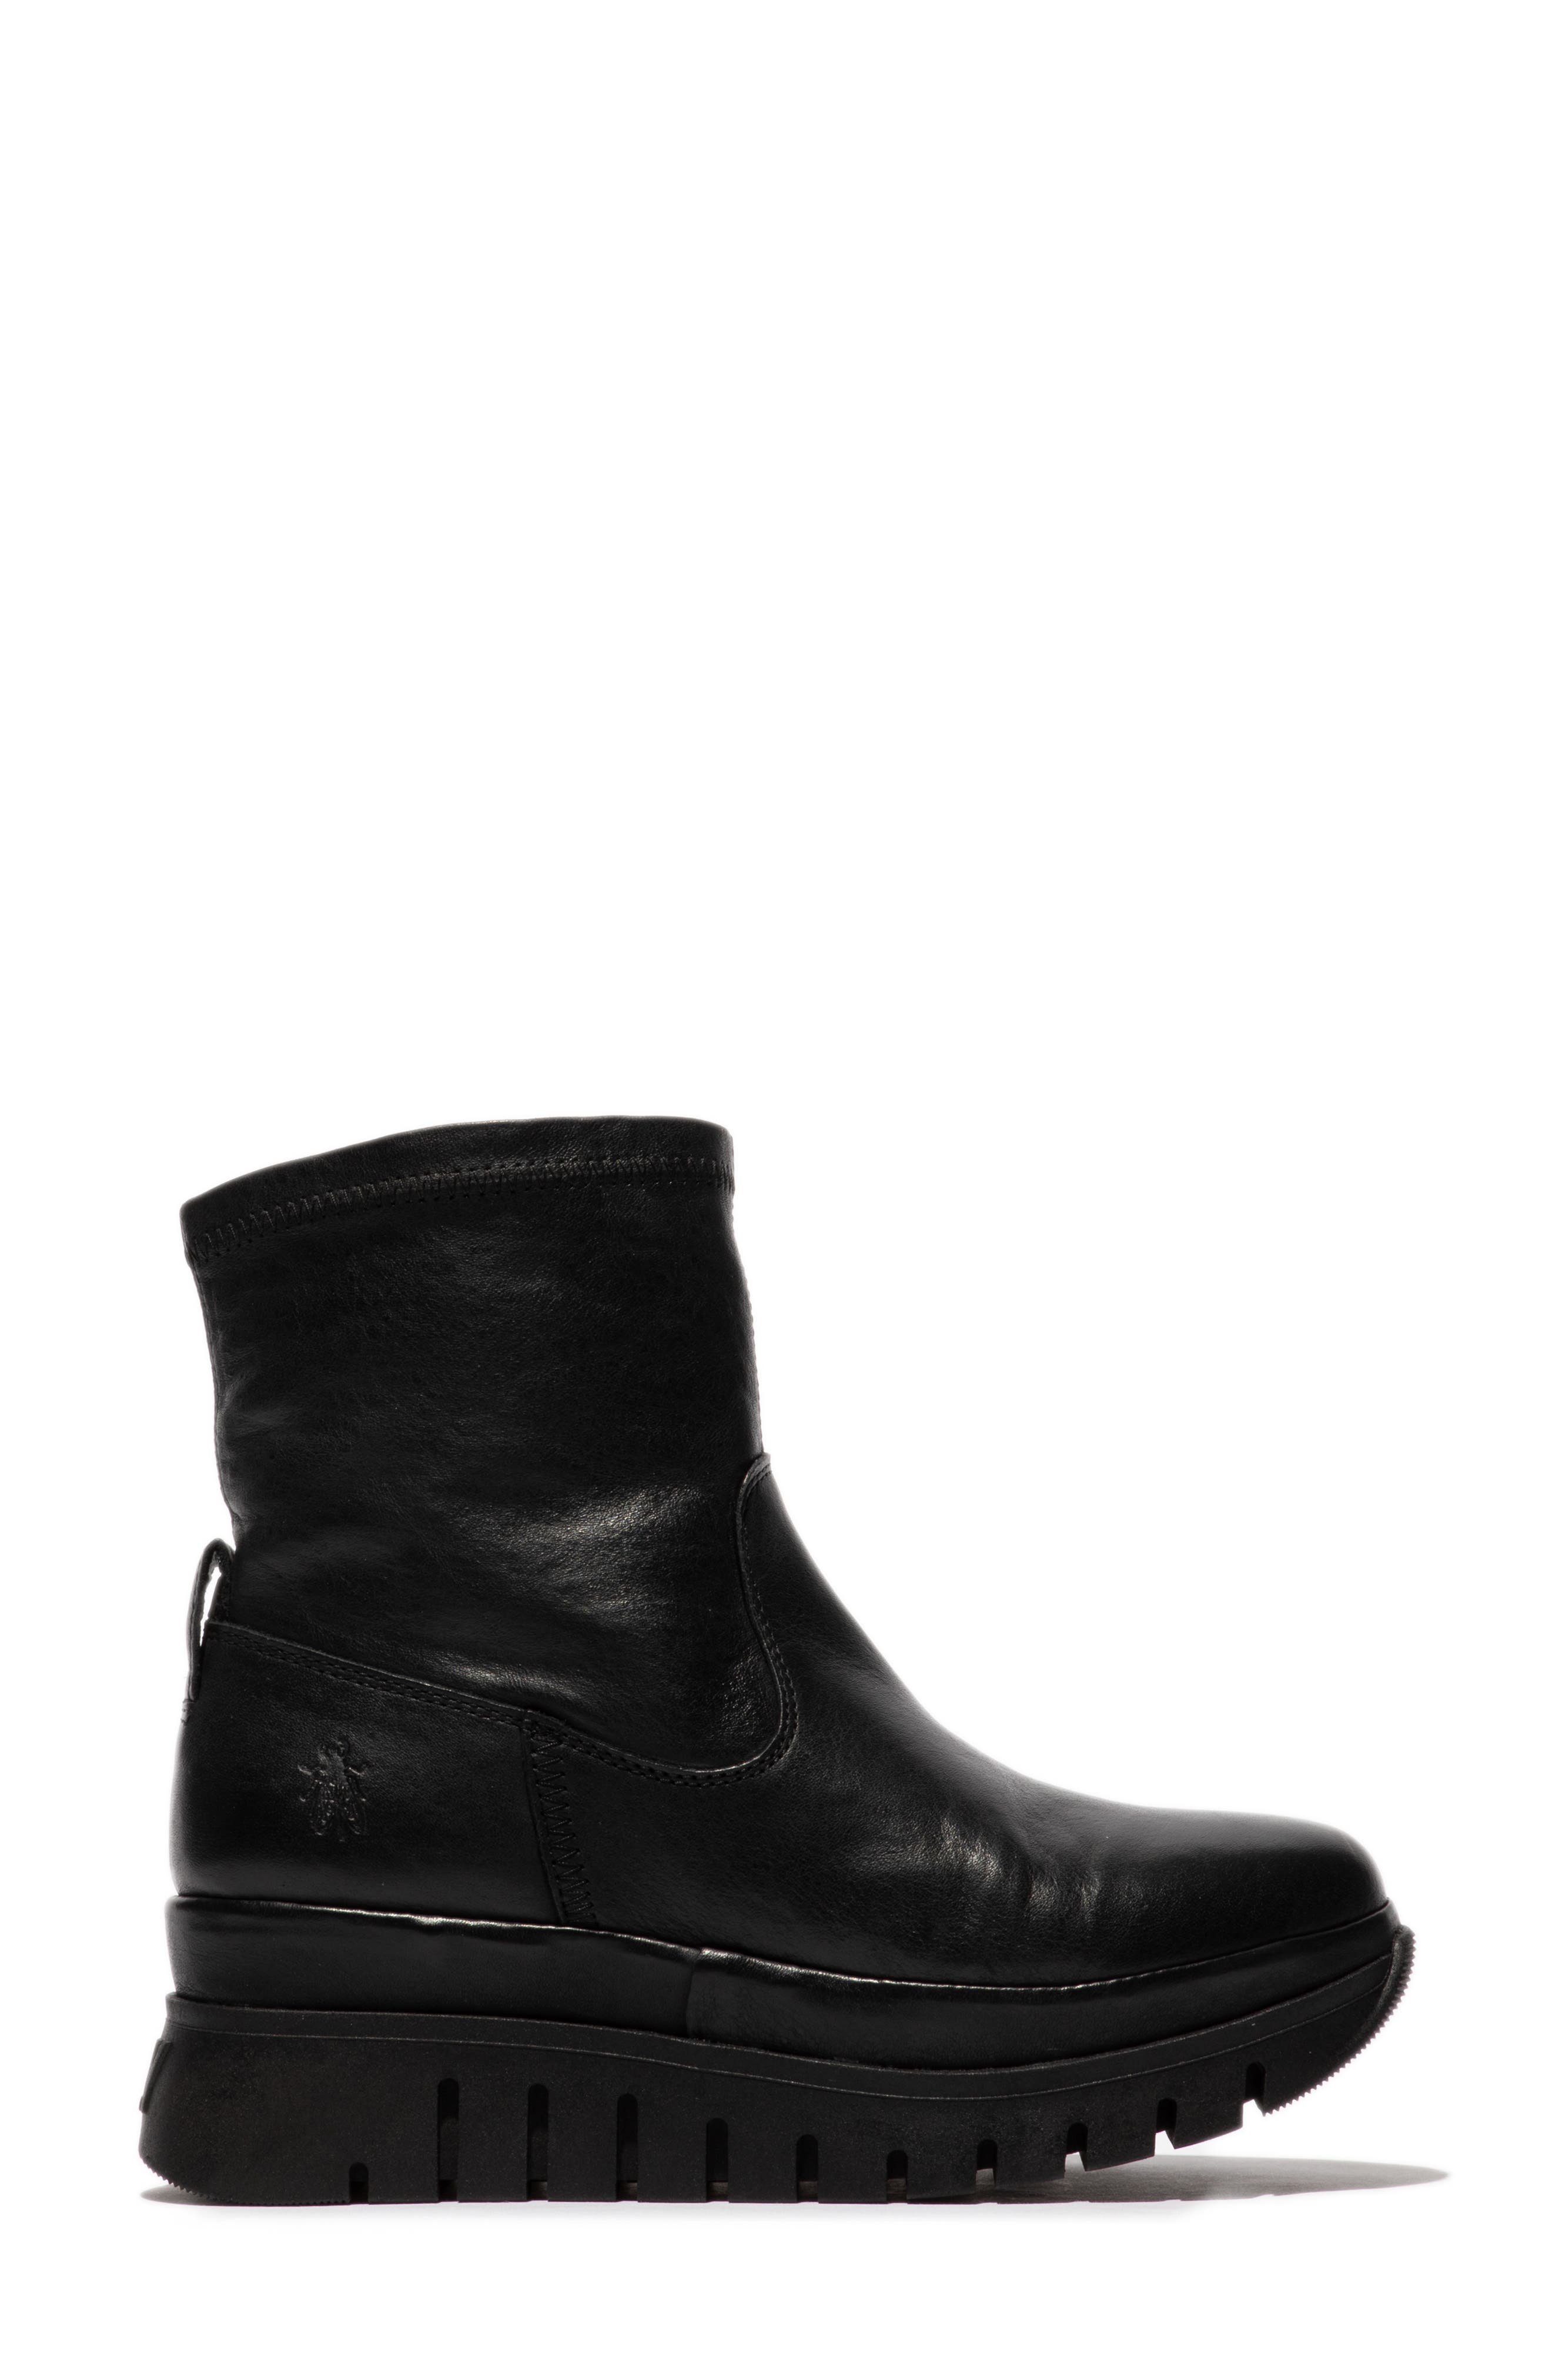 fly mon944 ankle boots